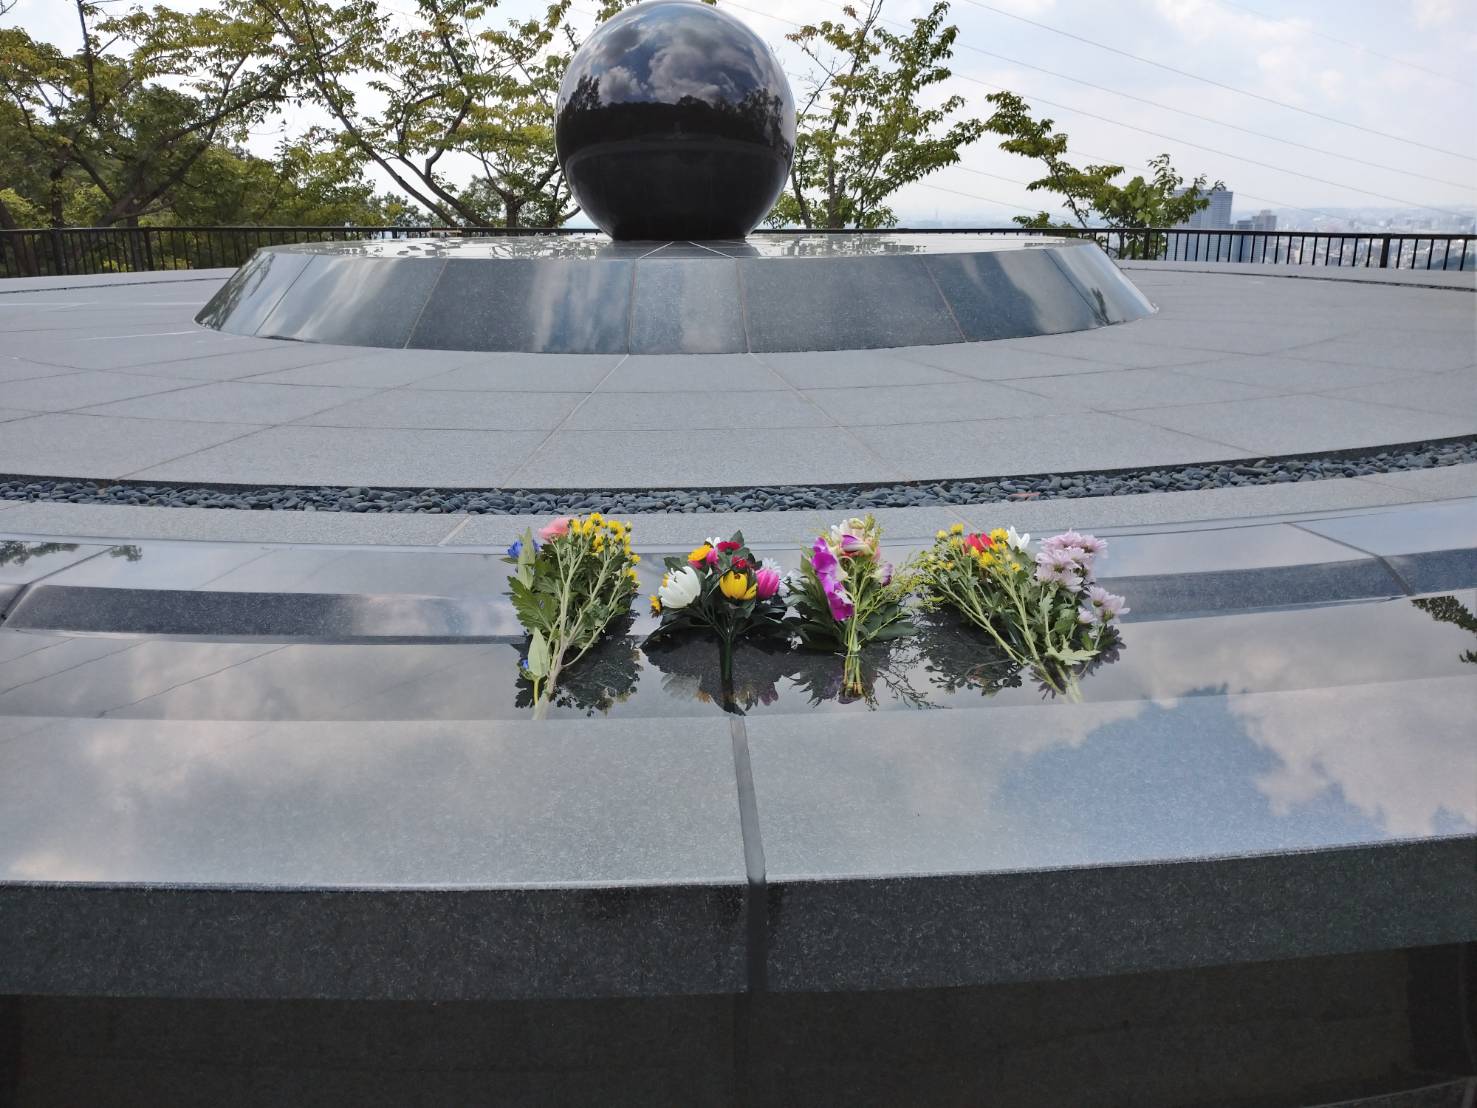 Photograph of flowers placed on a monument.